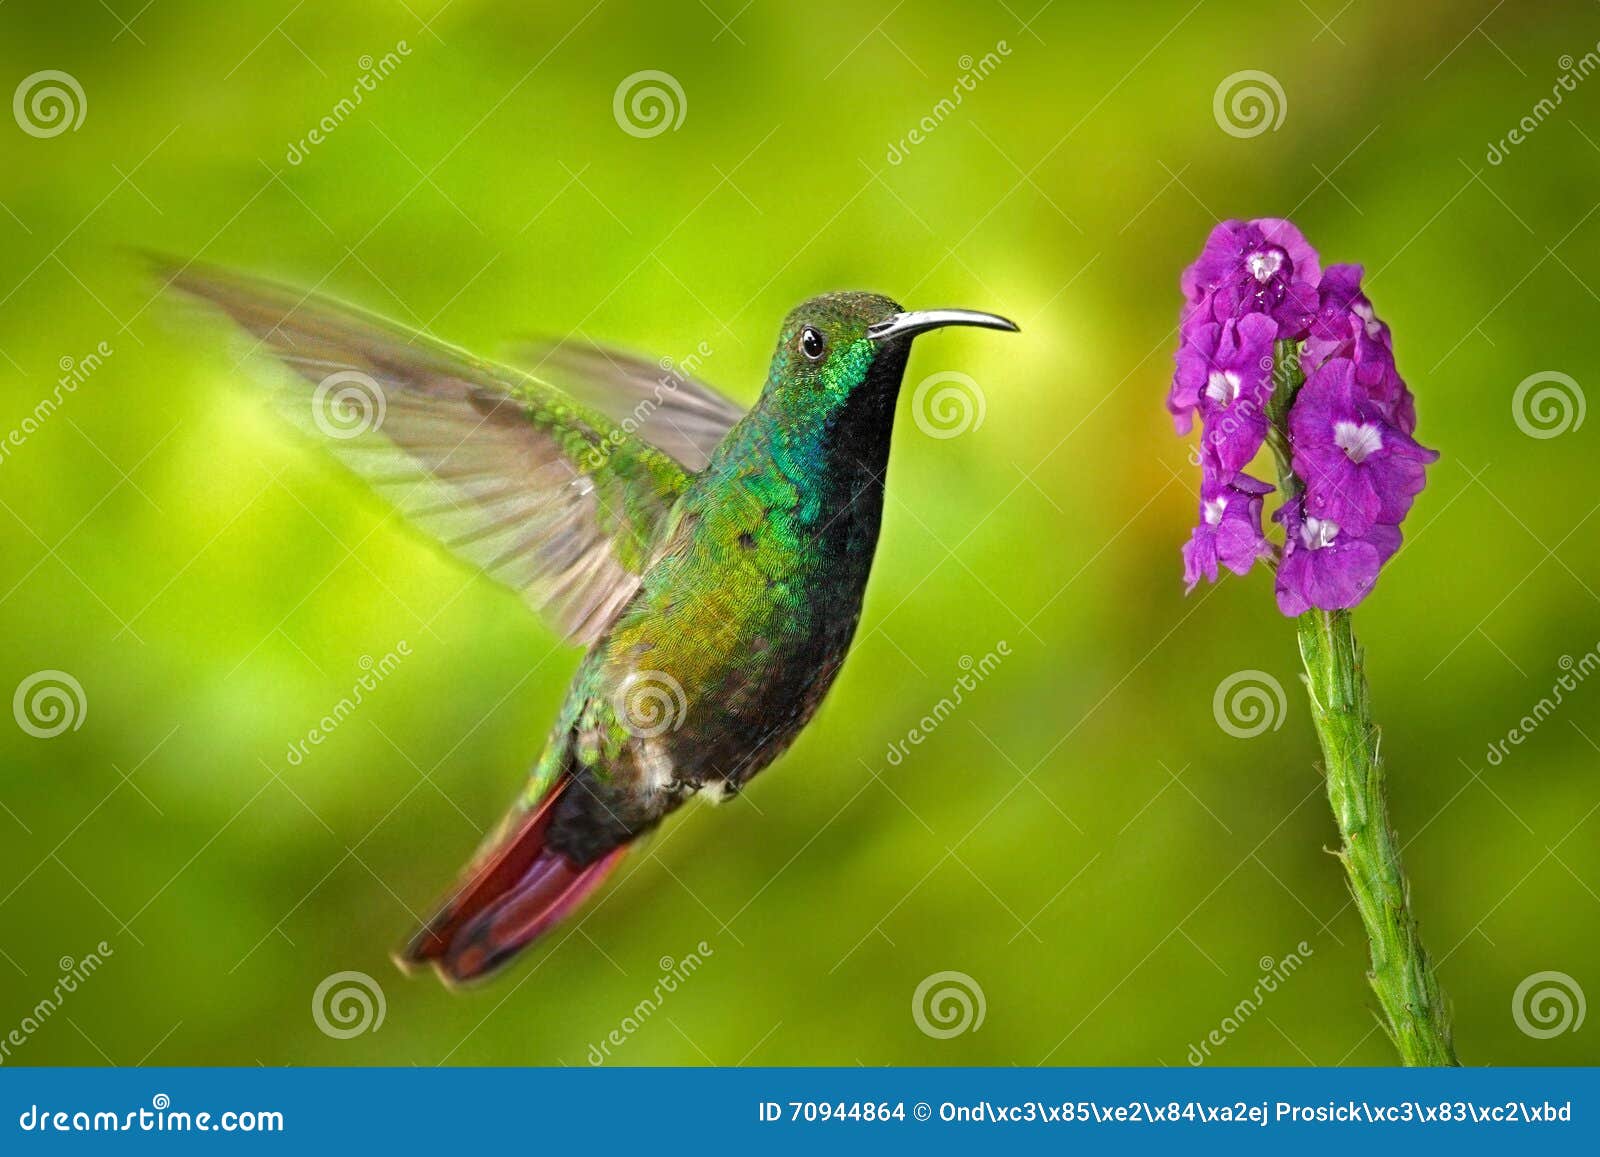 Details about   Absolutely Gorgeous 2 Humming Birds over Pink Flowers C 46-50 